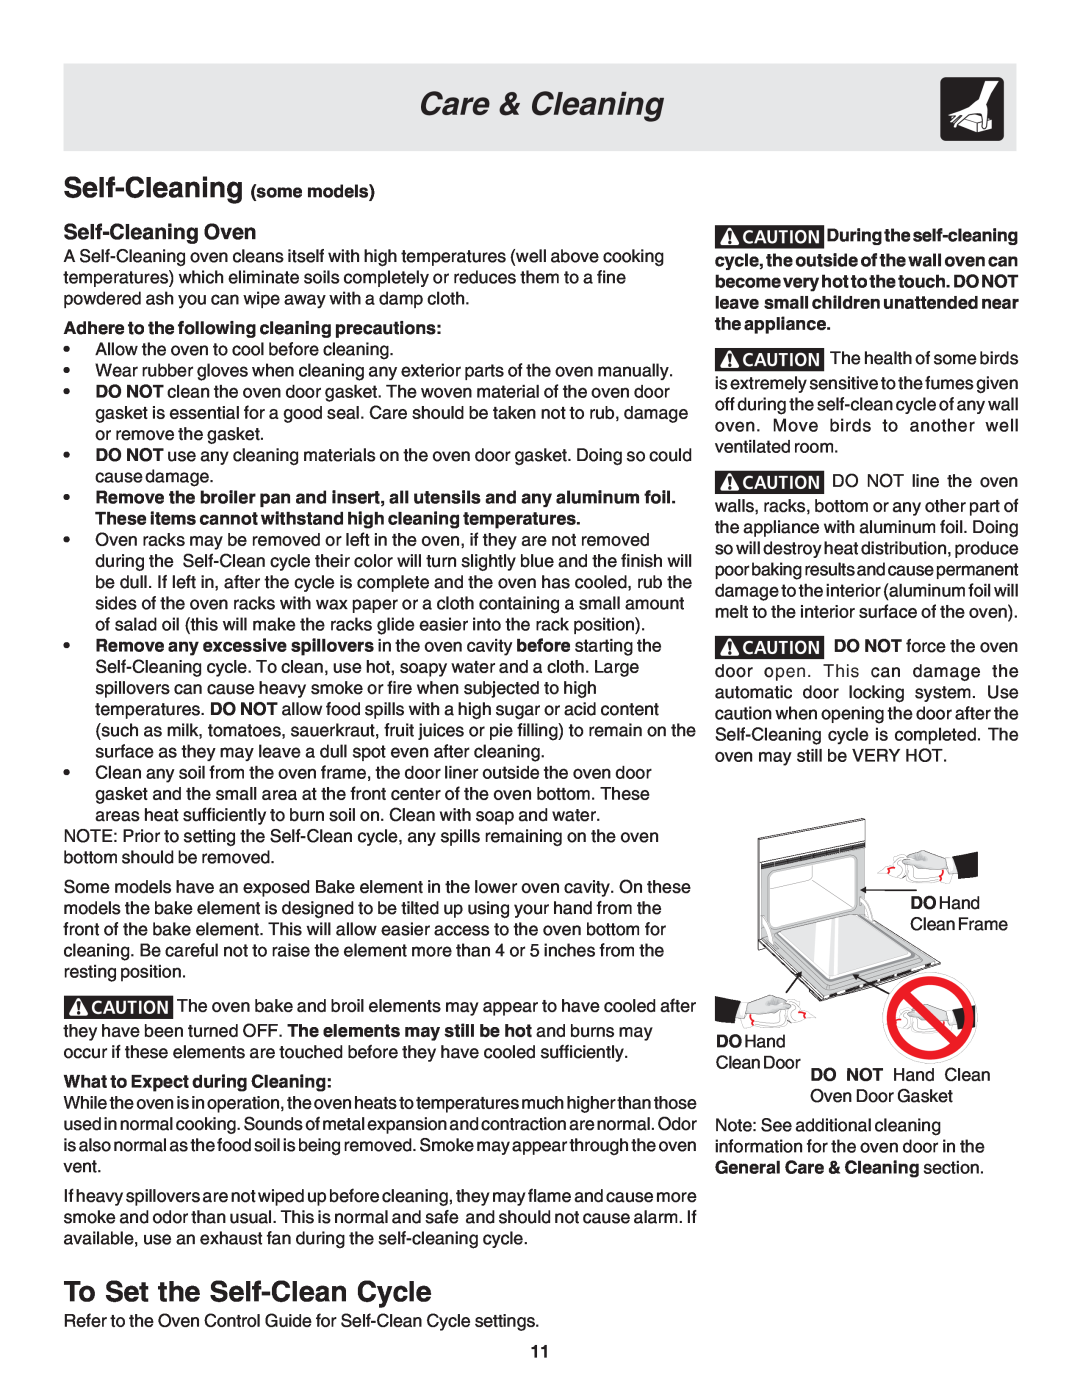 Frigidaire 318205103 manual Self-Cleaning some models, To Set the Self-Clean Cycle, Self-Cleaning Oven, Care & Cleaning 